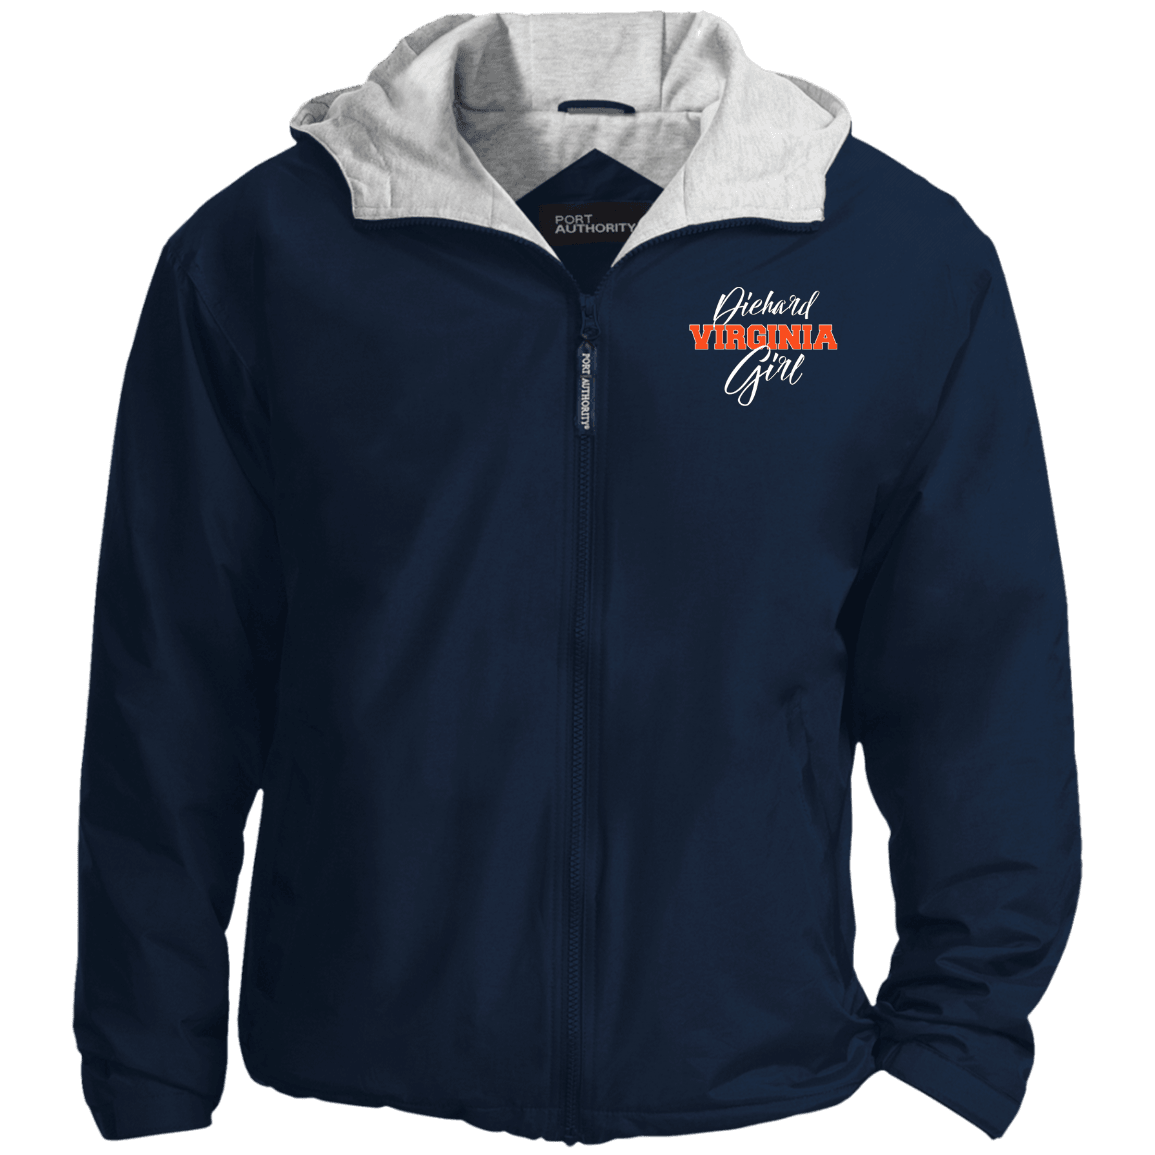 Designs by MyUtopia Shout Out:Diehard Virginia Girl Embroidered Port Authority Team Jacket - Navy Blue,Bright Navy/Light Oxford / X-Small,Jackets